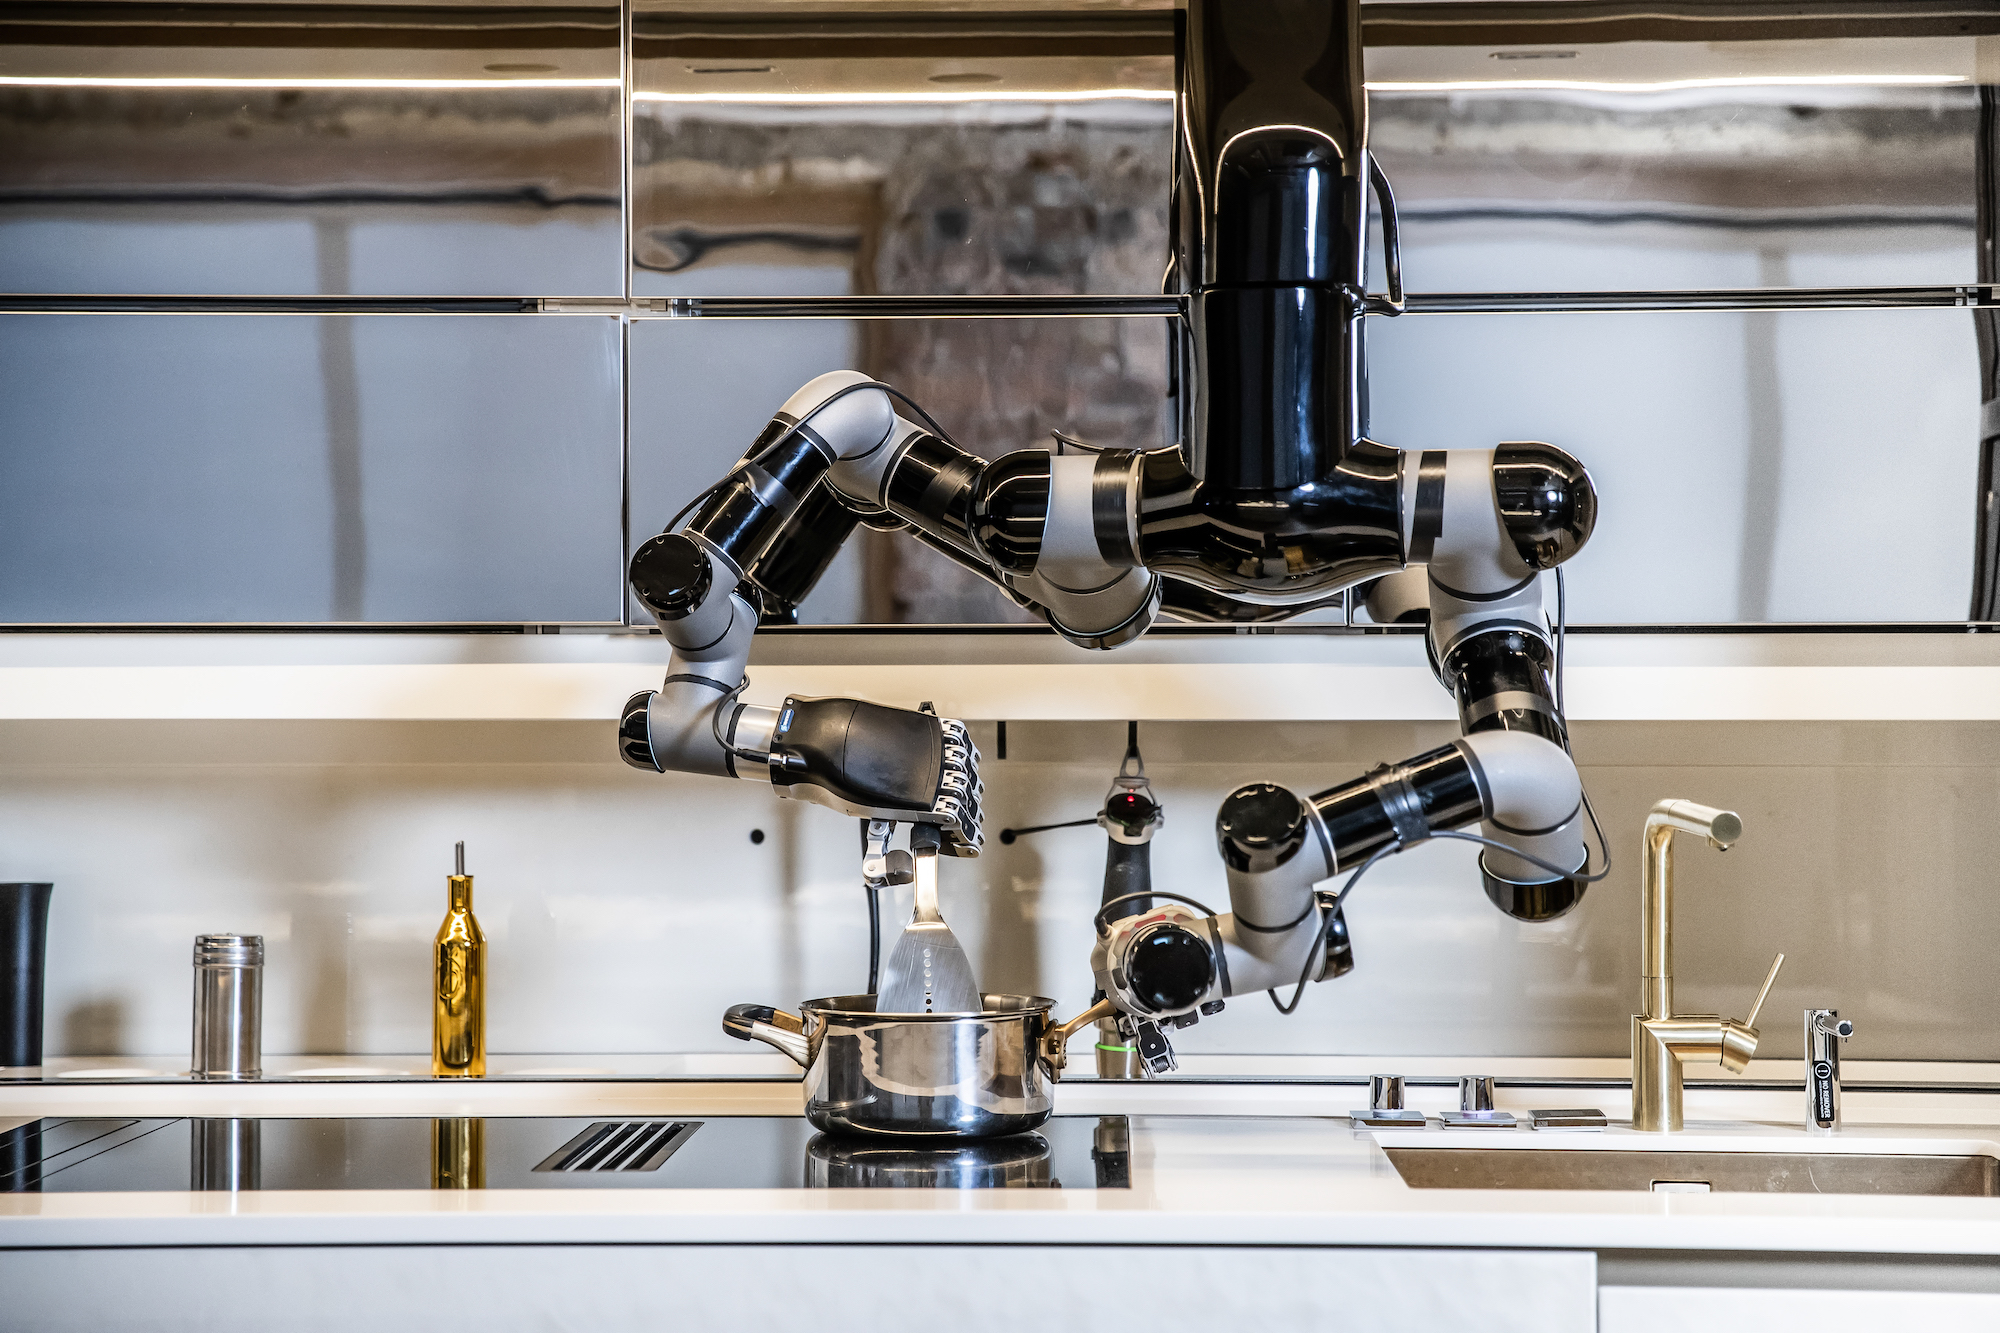 Moley, the robotic kitchen, comes loaded with much more than a handful of recipes